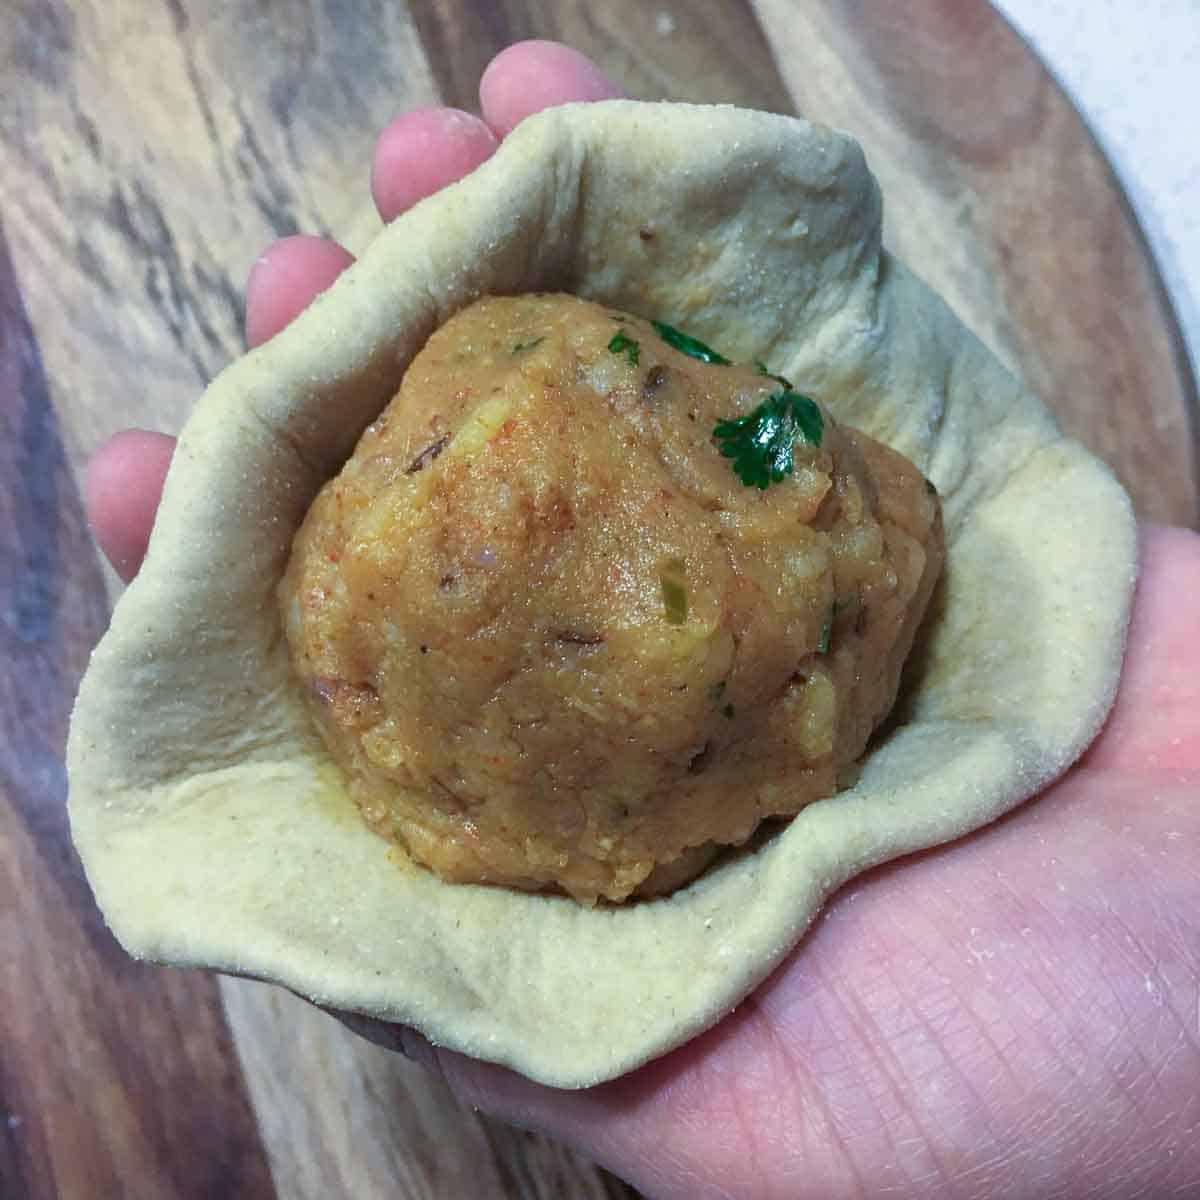 Step showing a ball of potato stuffing placed on a disc of rolled dough.